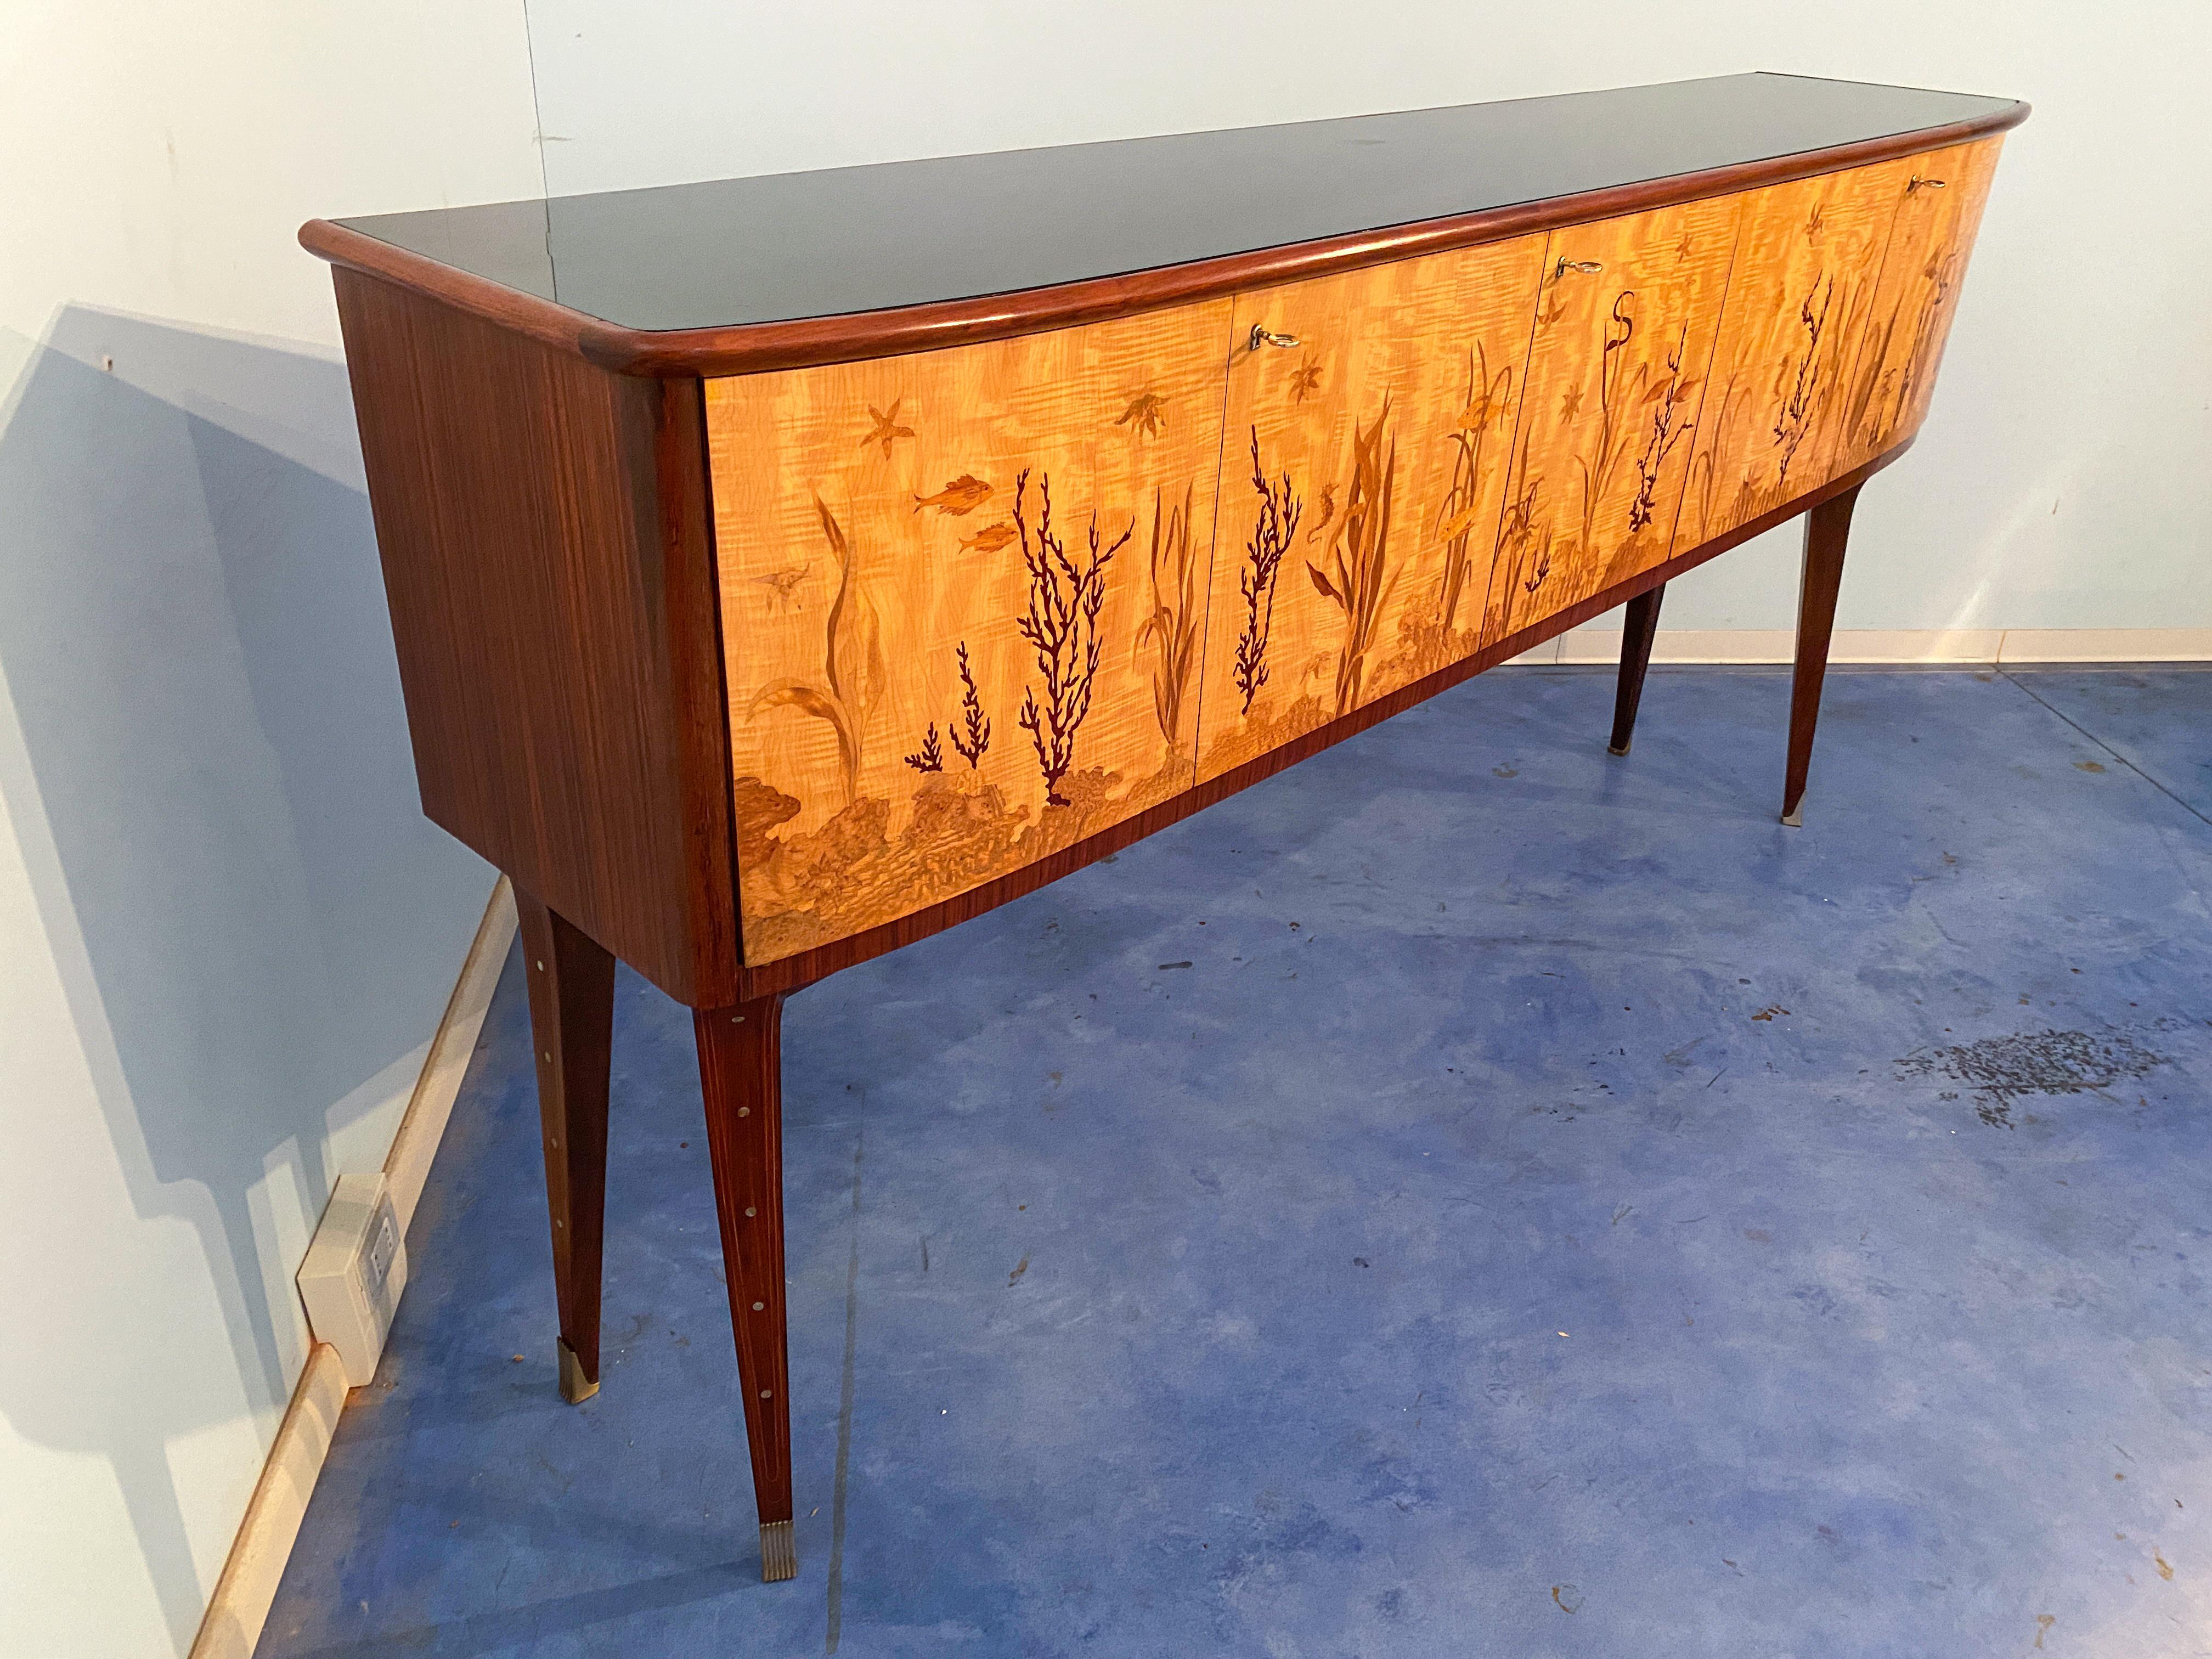 Mid-20th Century Italian Midcentury Inlaid Maple Sideboard by Andrea Gusmai, 1950s For Sale